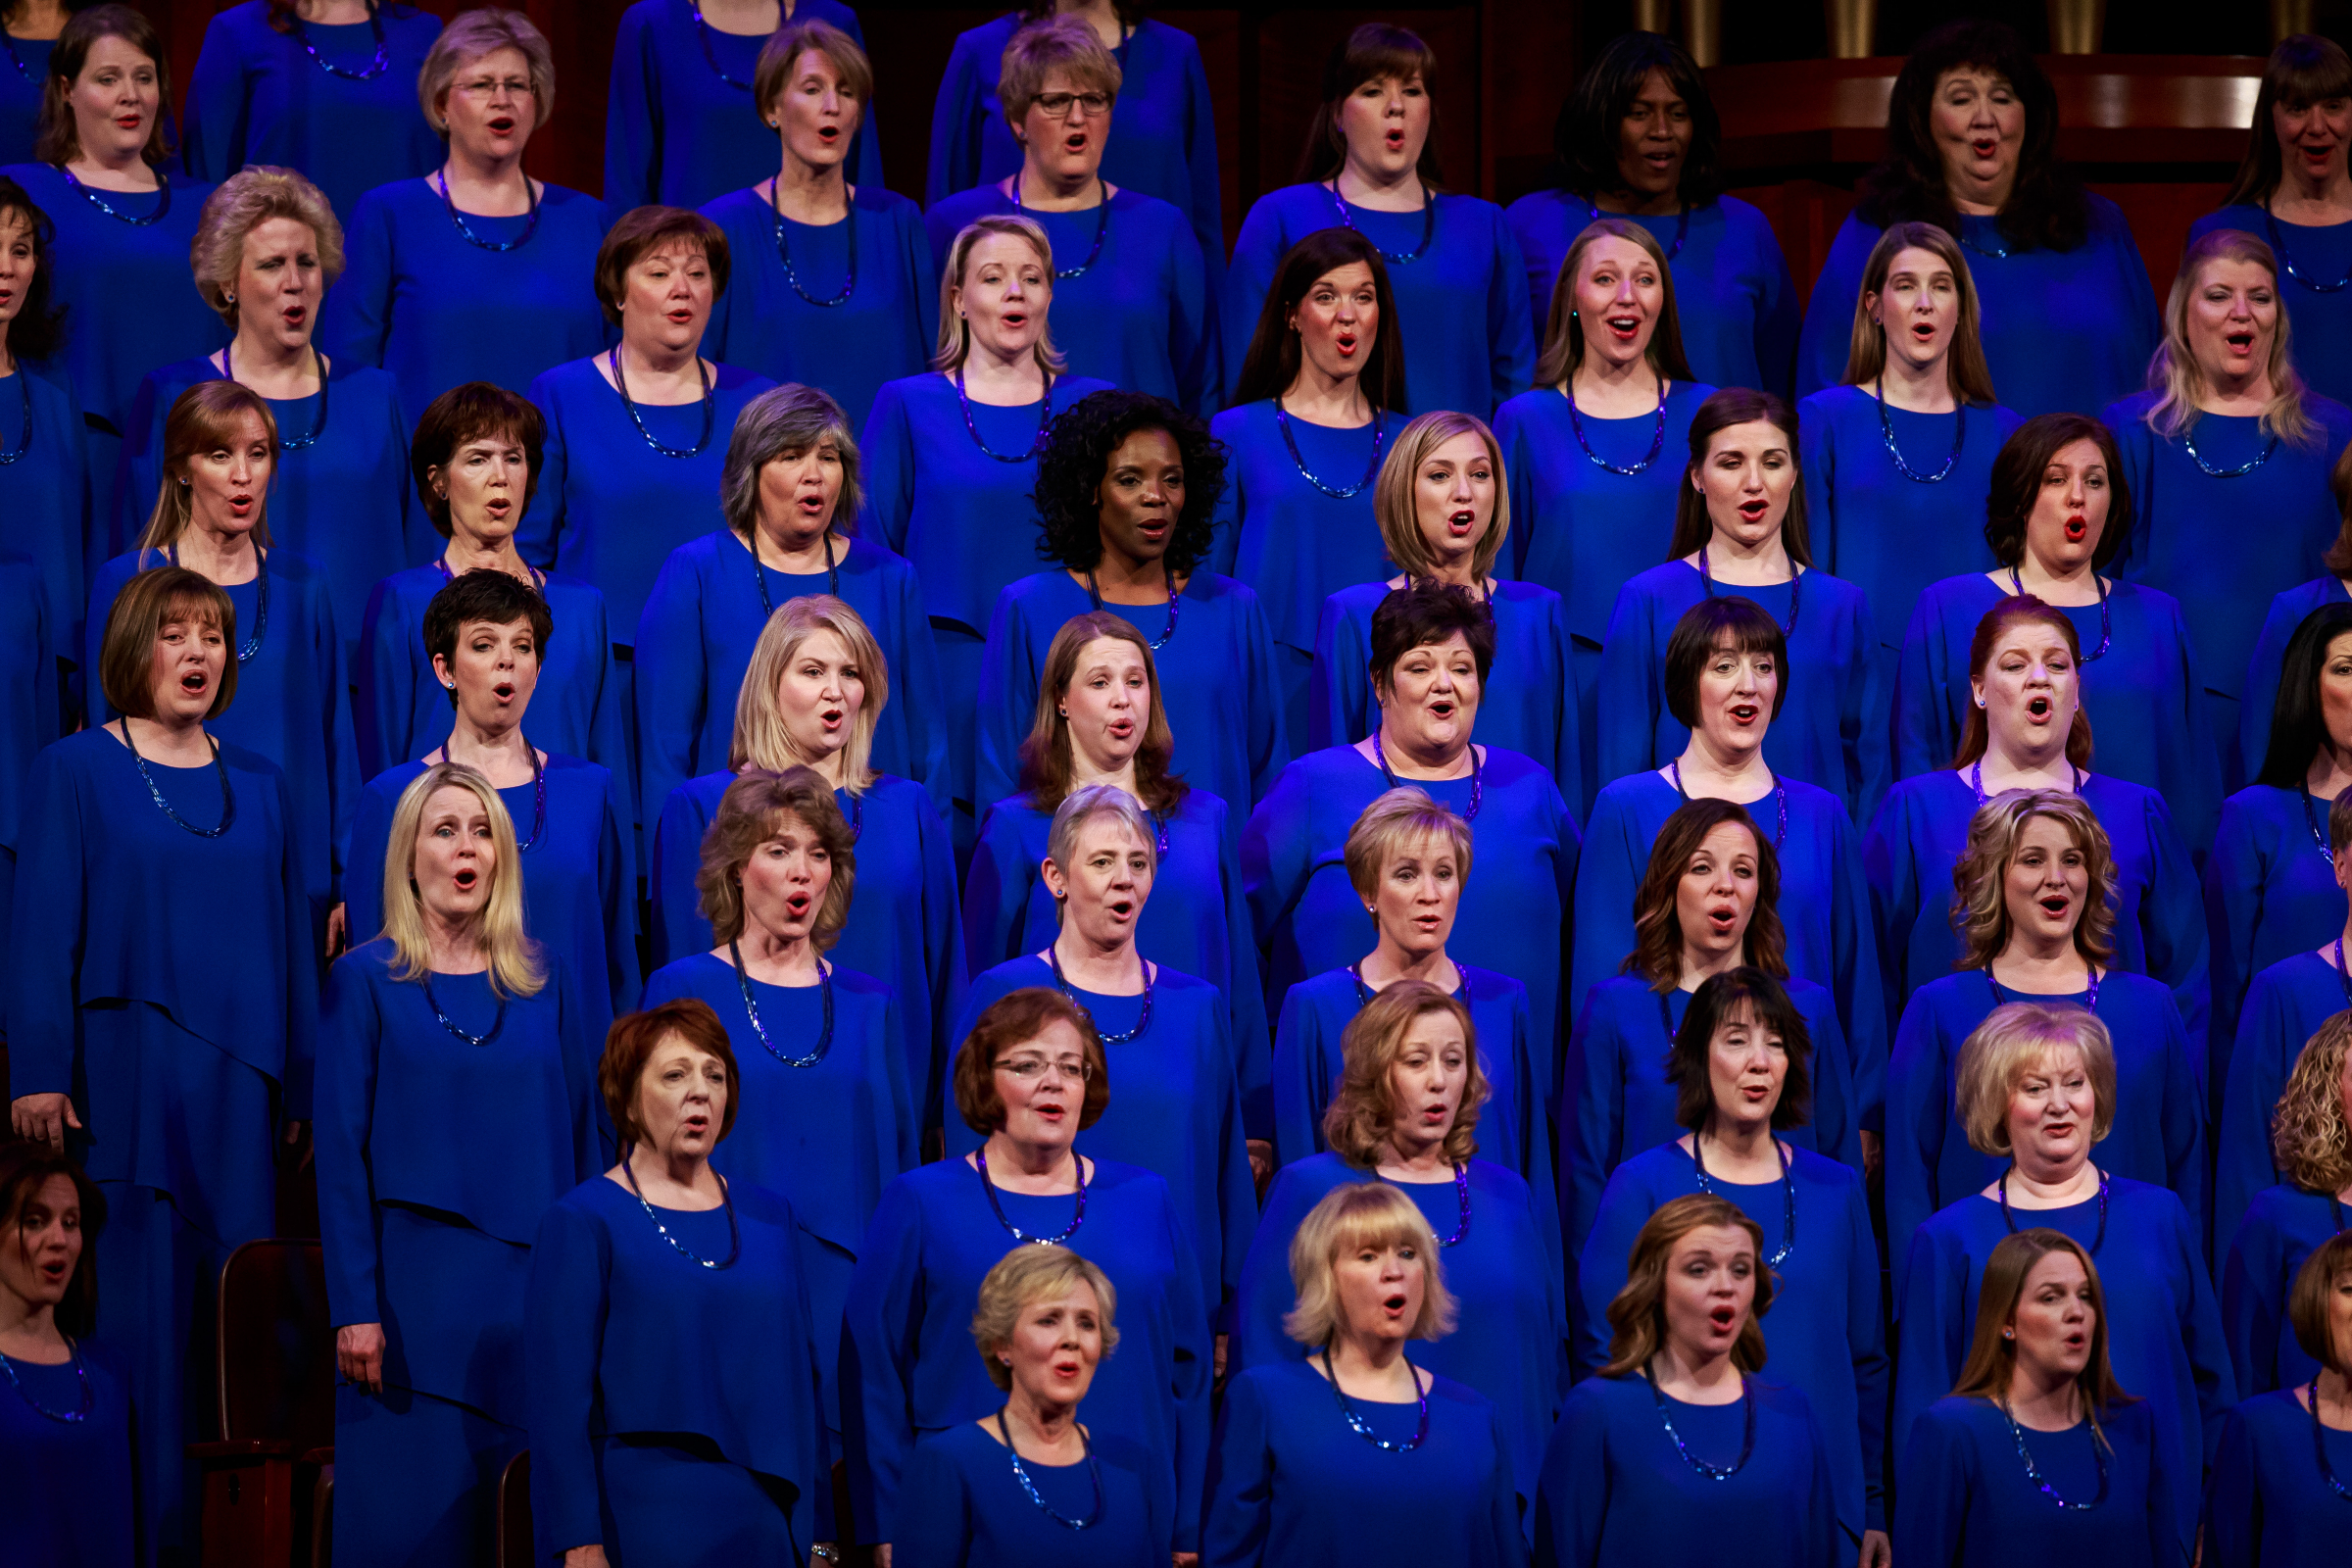 Women Of The Choir At The 2013 Christmas Concert